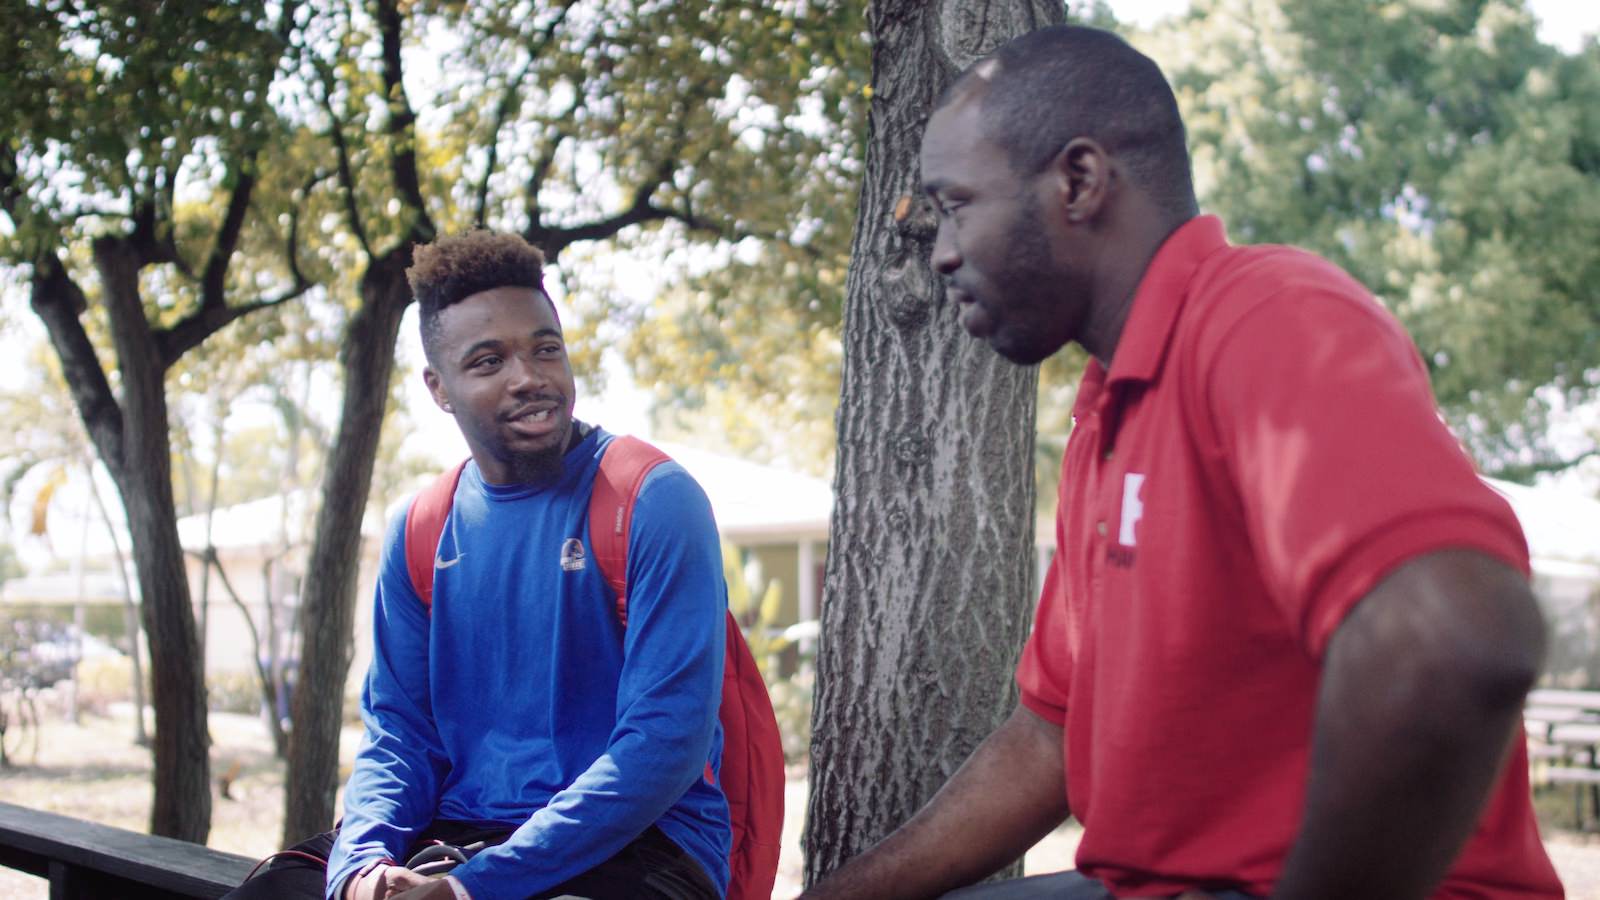 IU Professional marketing for nonprofit organizations Teacher wearing a red shirt talking to a student wearing a blue long sleeved shirt and red backpack outside